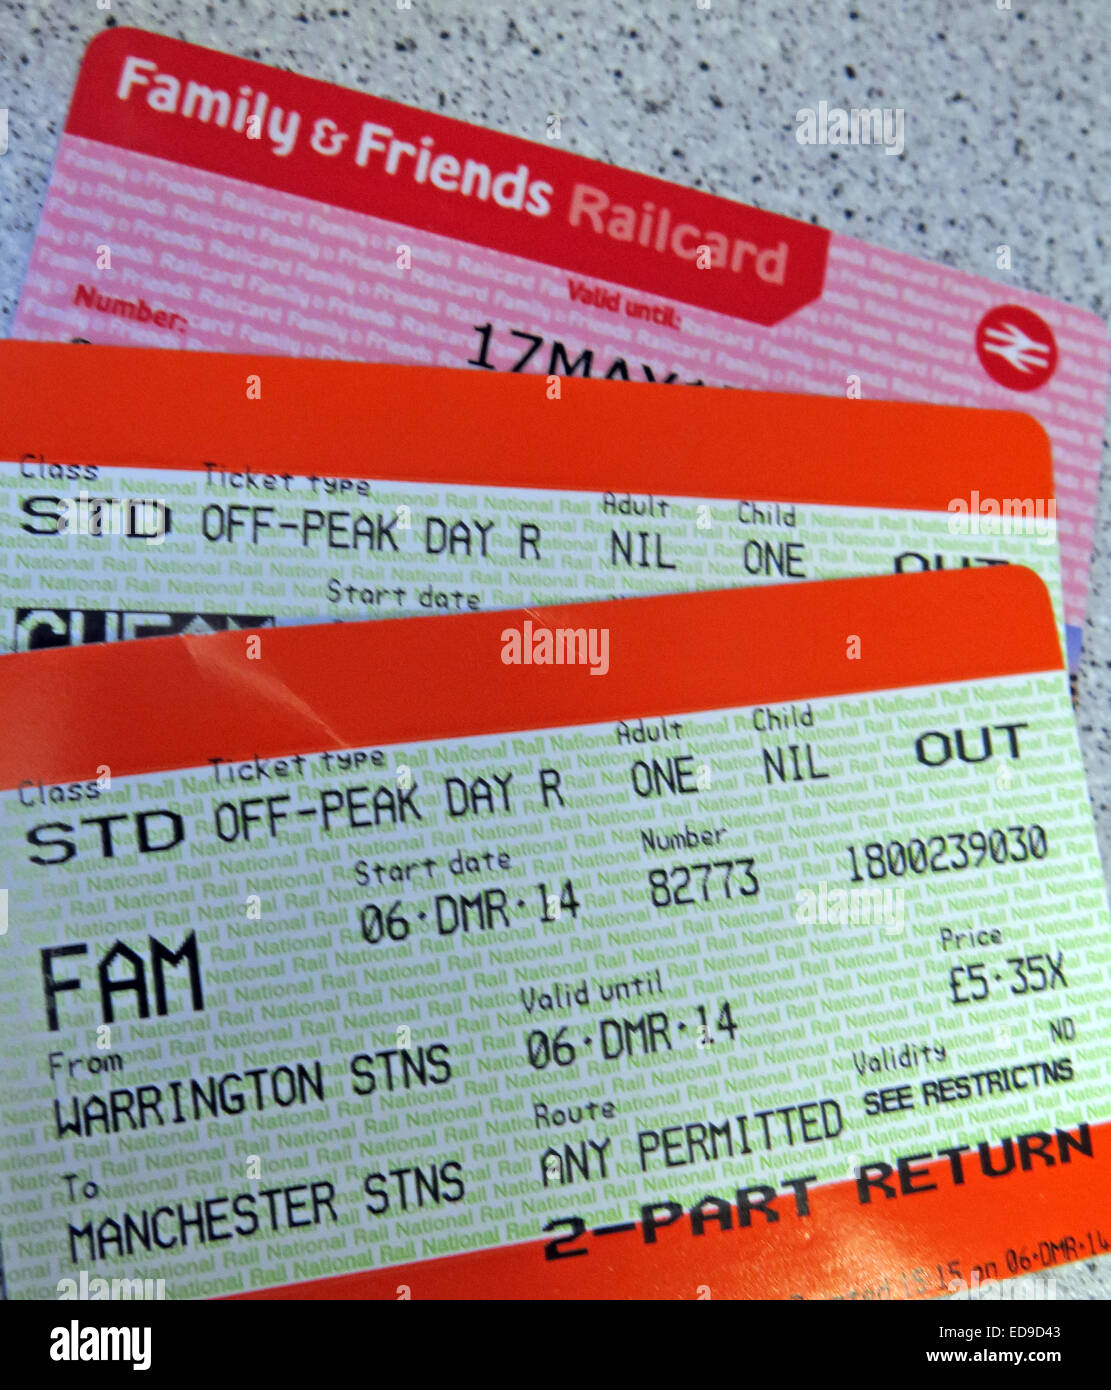 Family & friends UK railcard with tickets Stock Photo